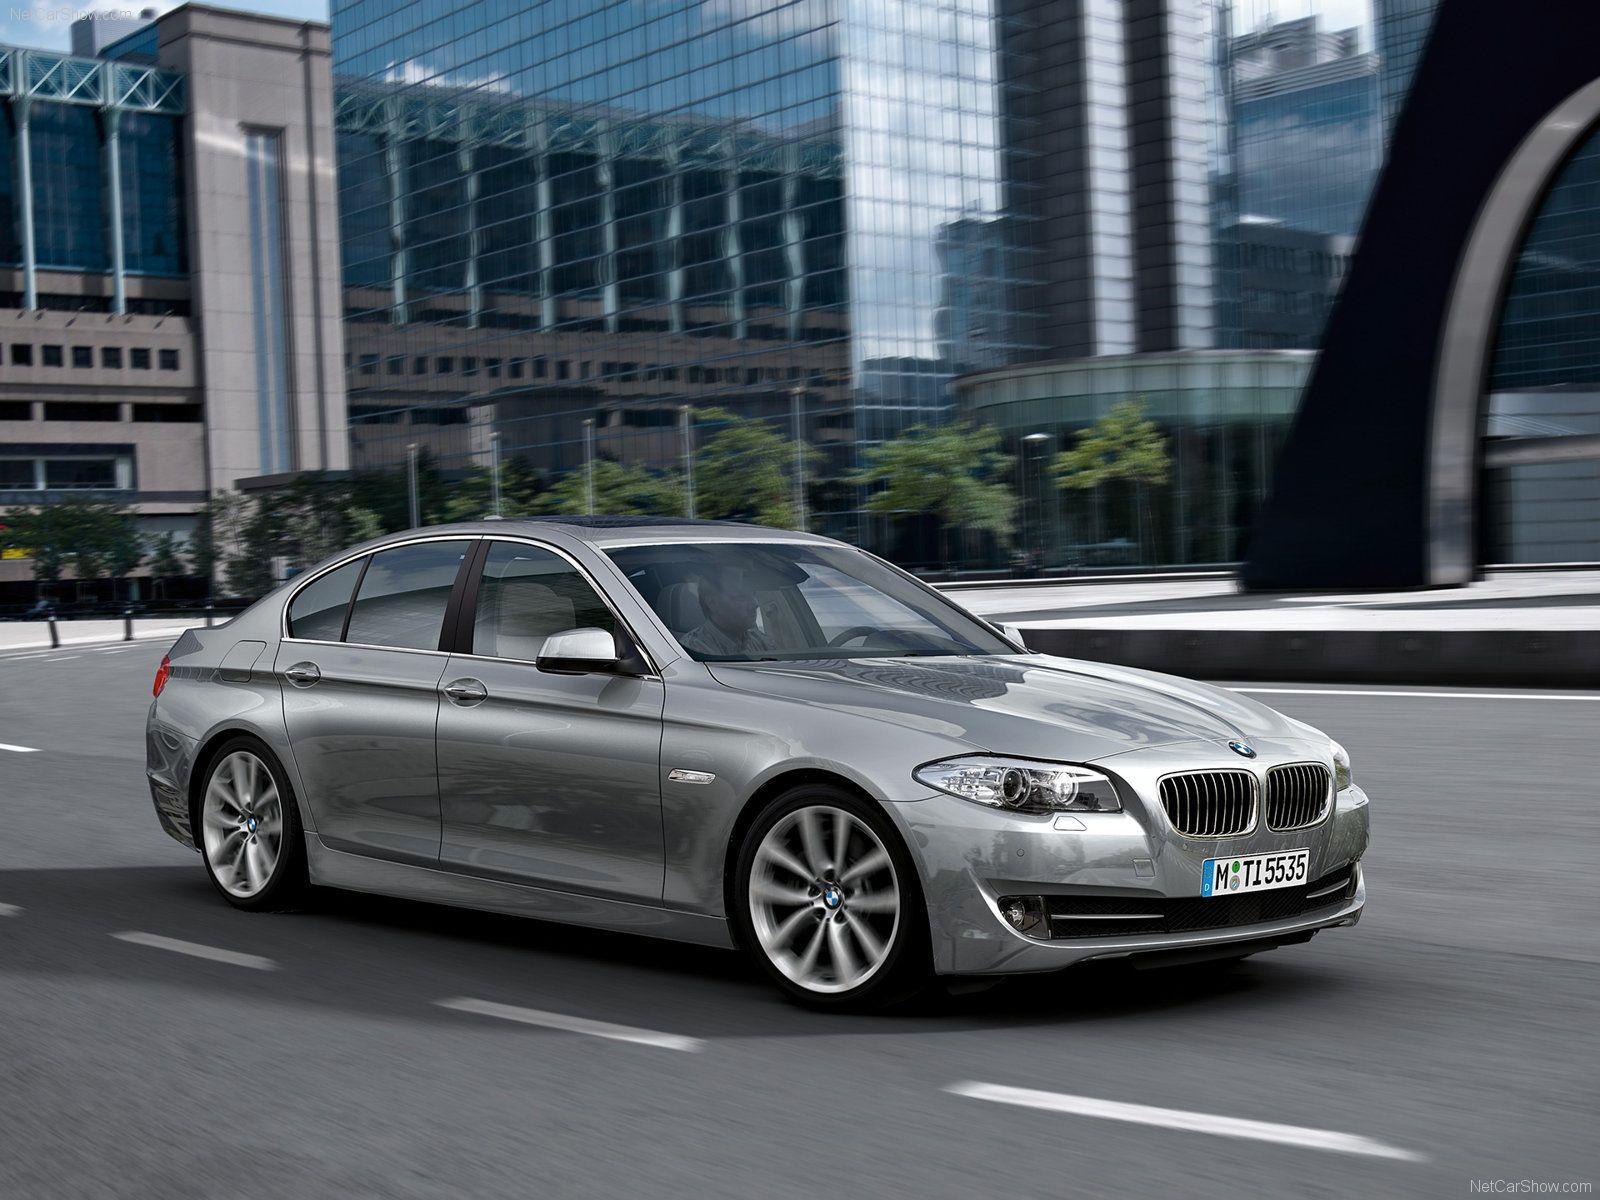 BMW 5 Series F10 Picture # 69349. BMW Photo Gallery